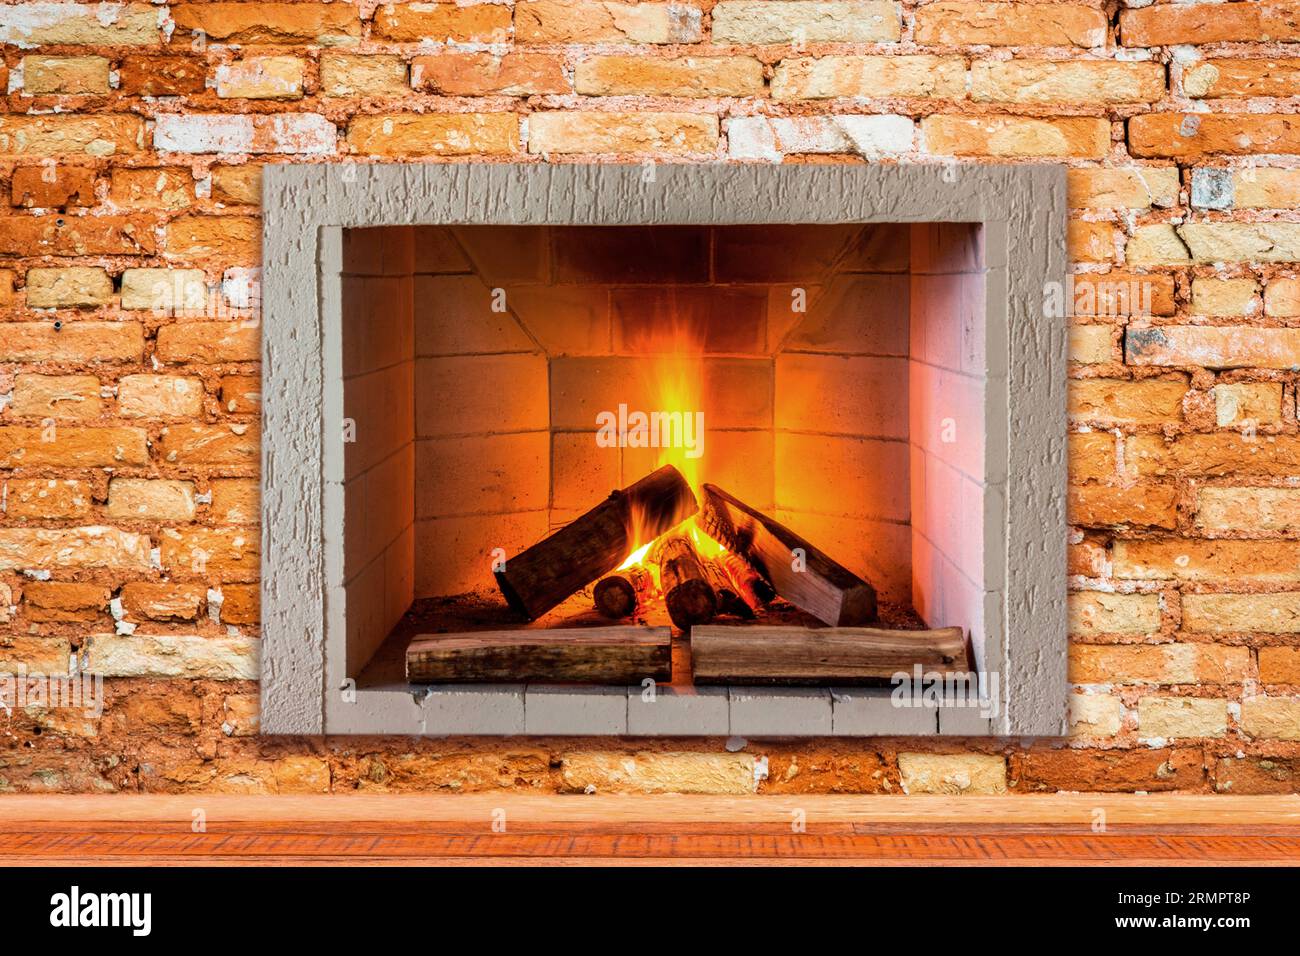 An ornate brick fireplace with a roaring fire burning in the hearth, emitting a warm and inviting glow Stock Photo